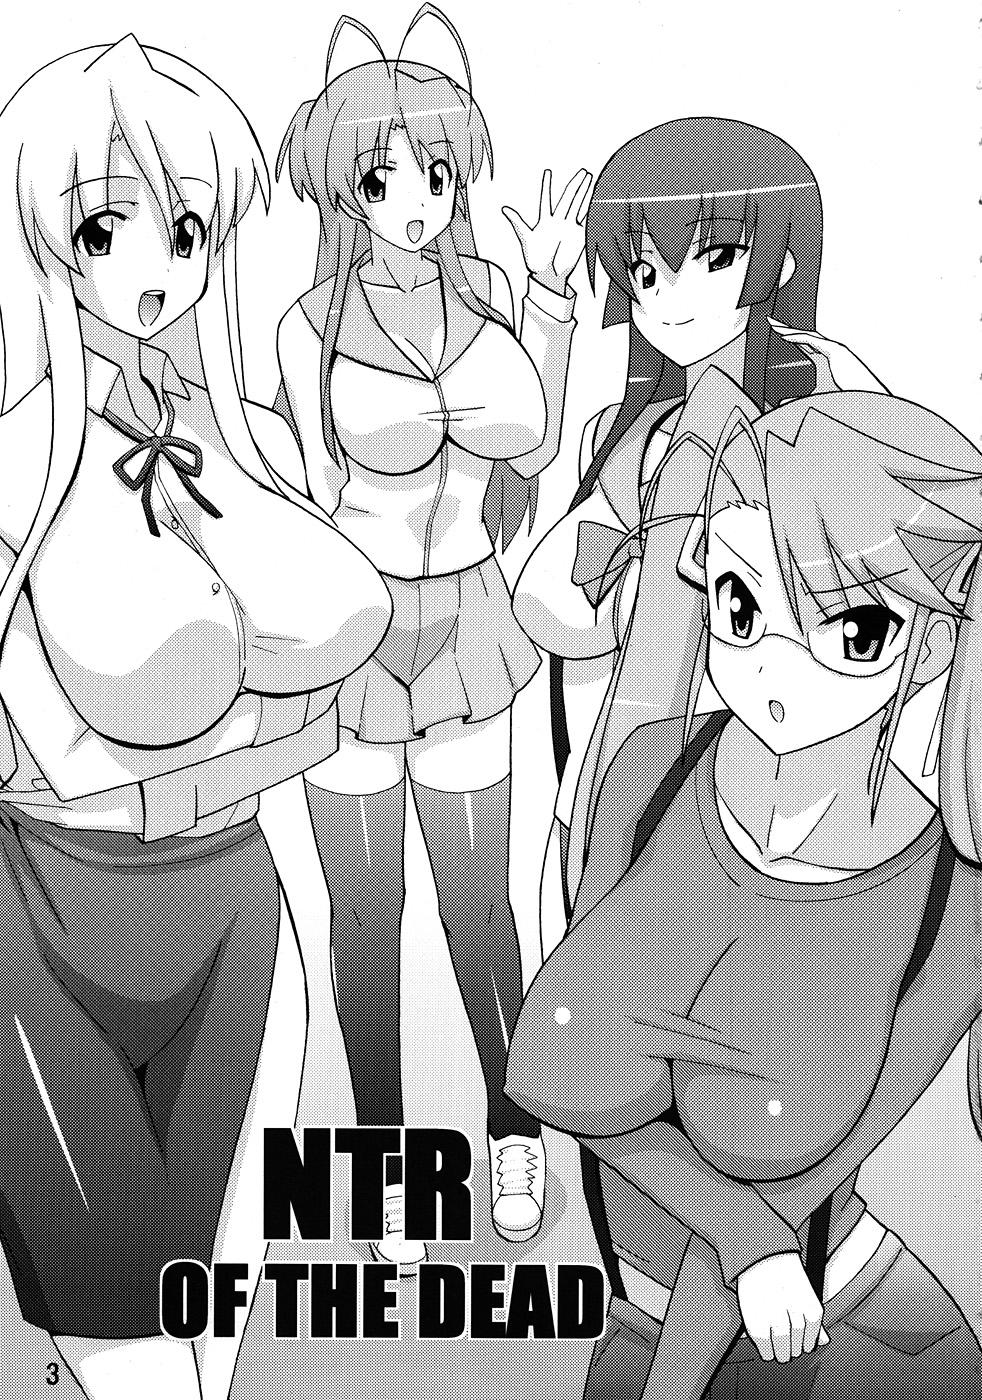 Little NTR OF THE DEAD - Highschool of the dead Transexual - Page 2